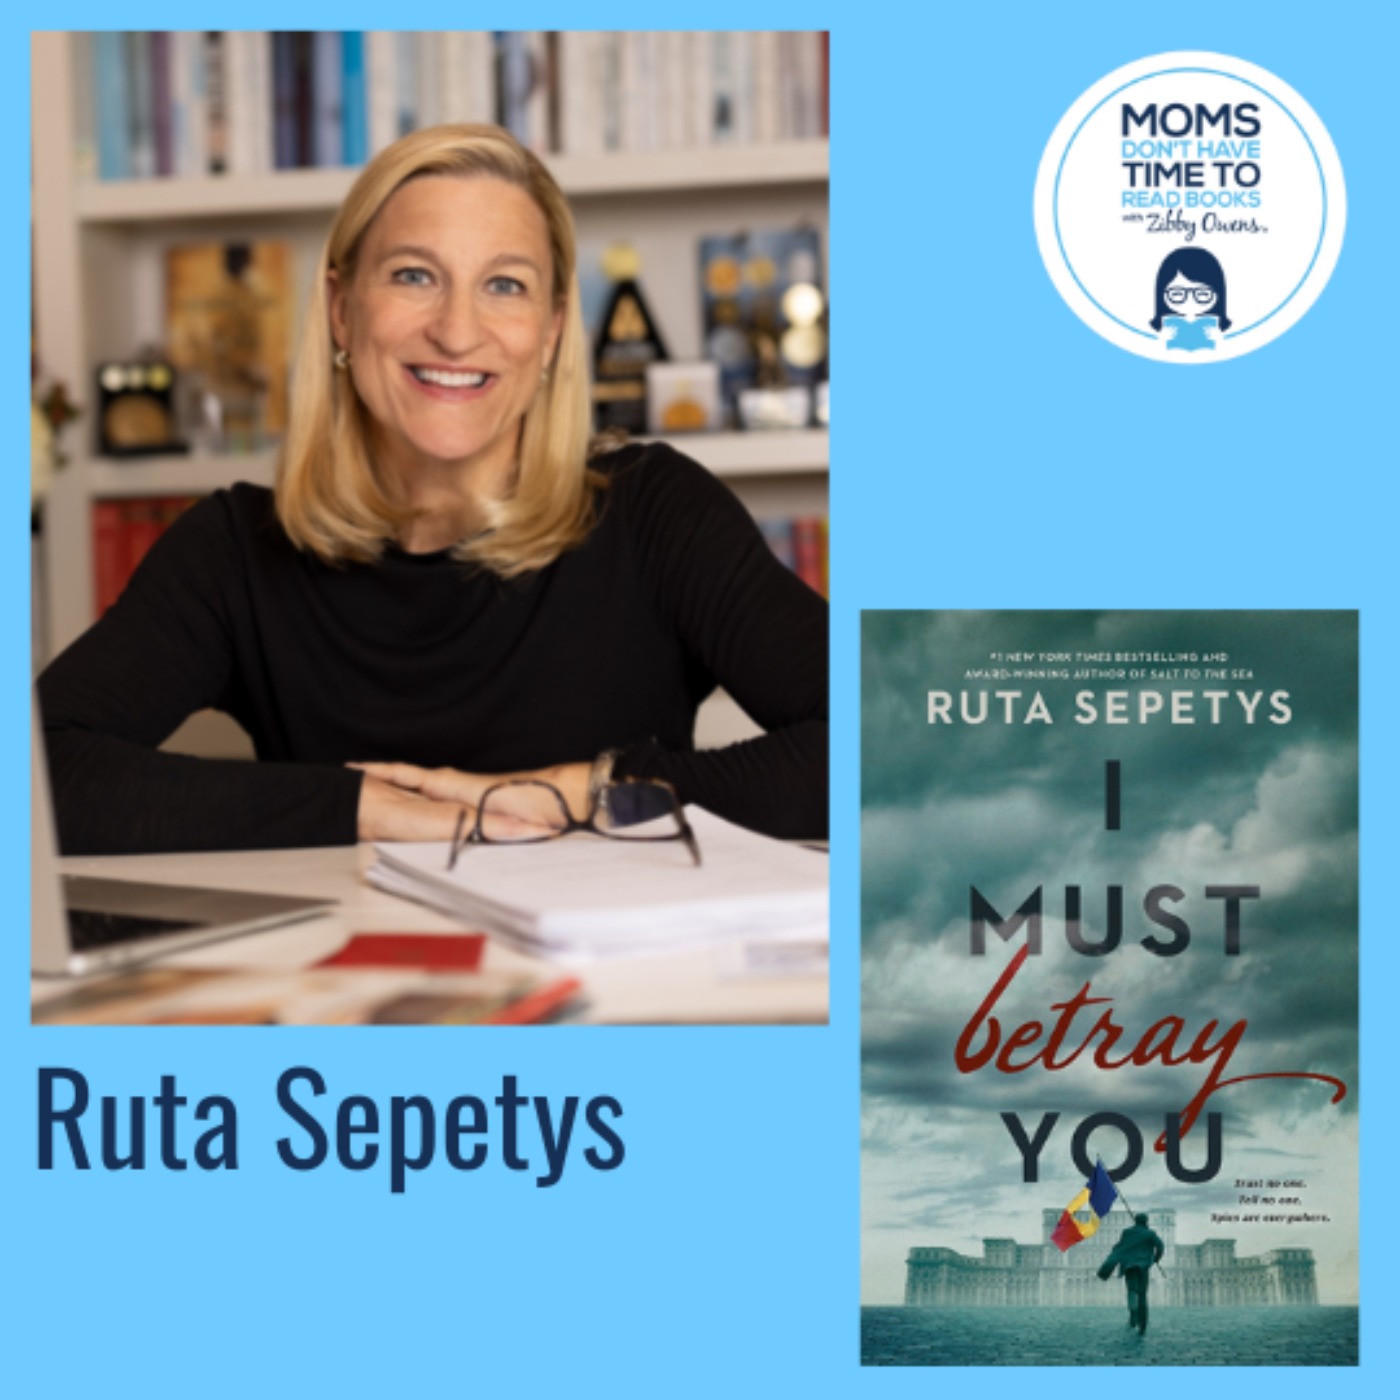 ruta sepetys i must betray you